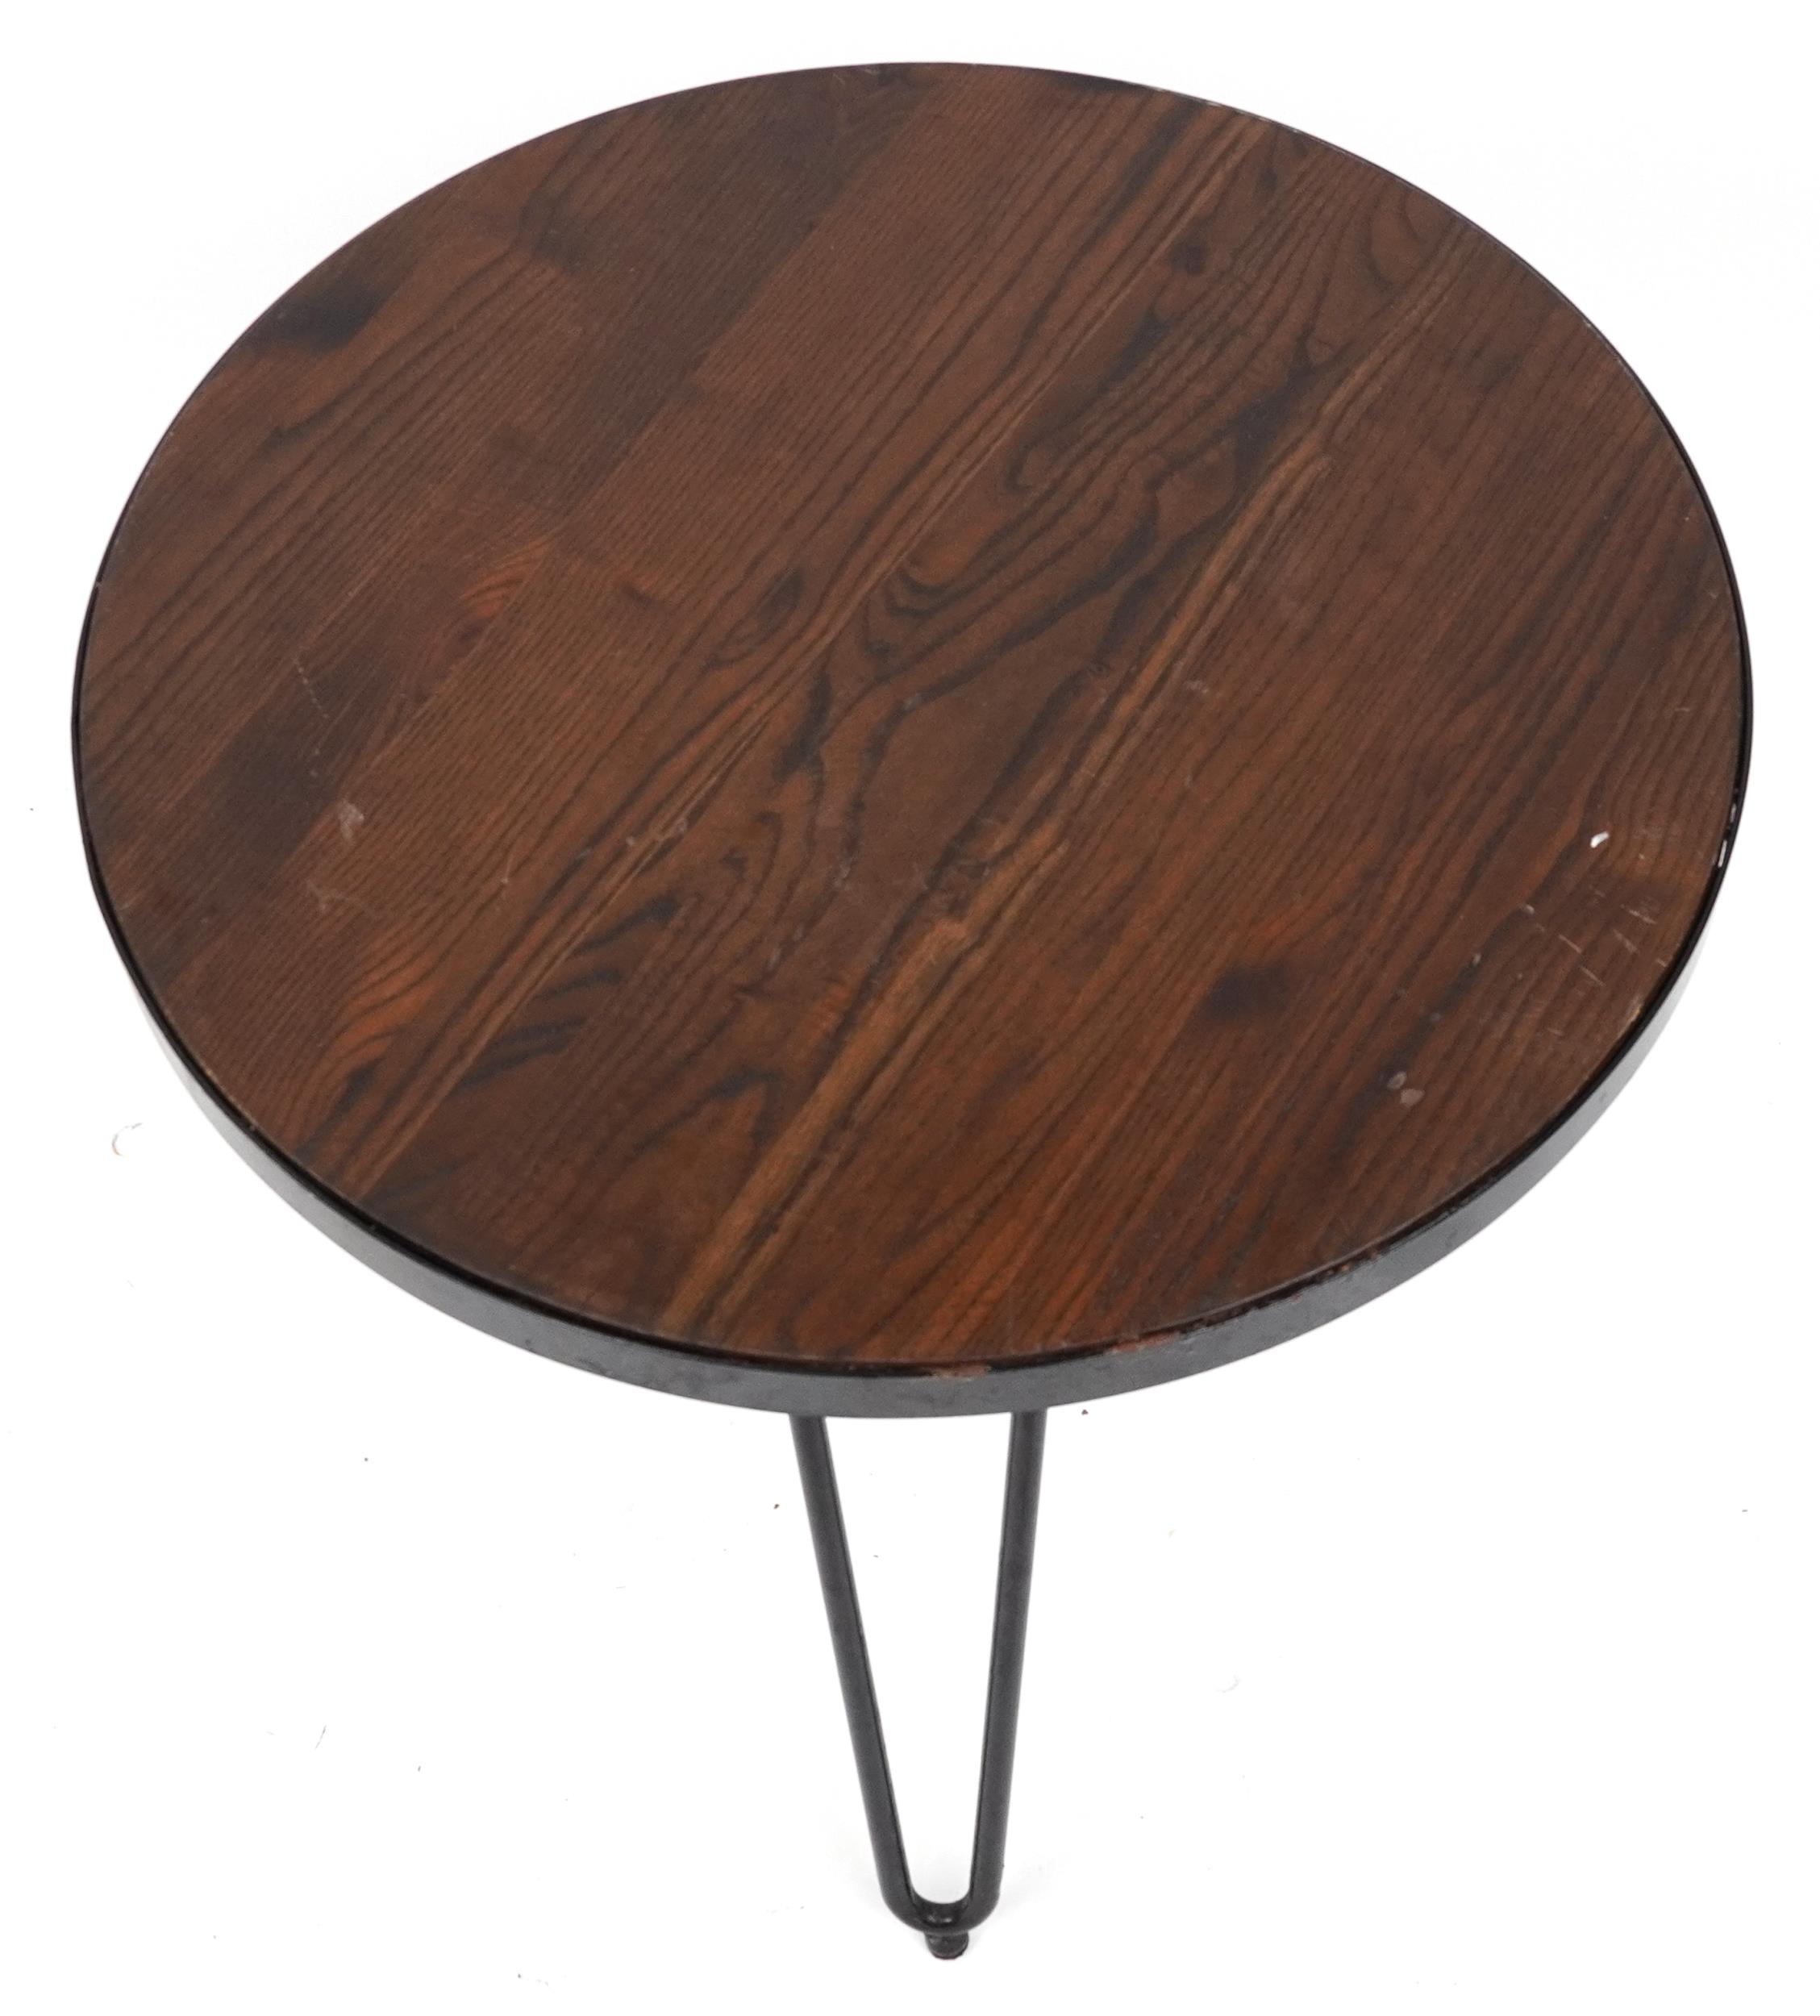 Industrial circular hardwood and wrought iron occasional table with hairpin legs, 53.5cm high x 61cm - Image 2 of 3